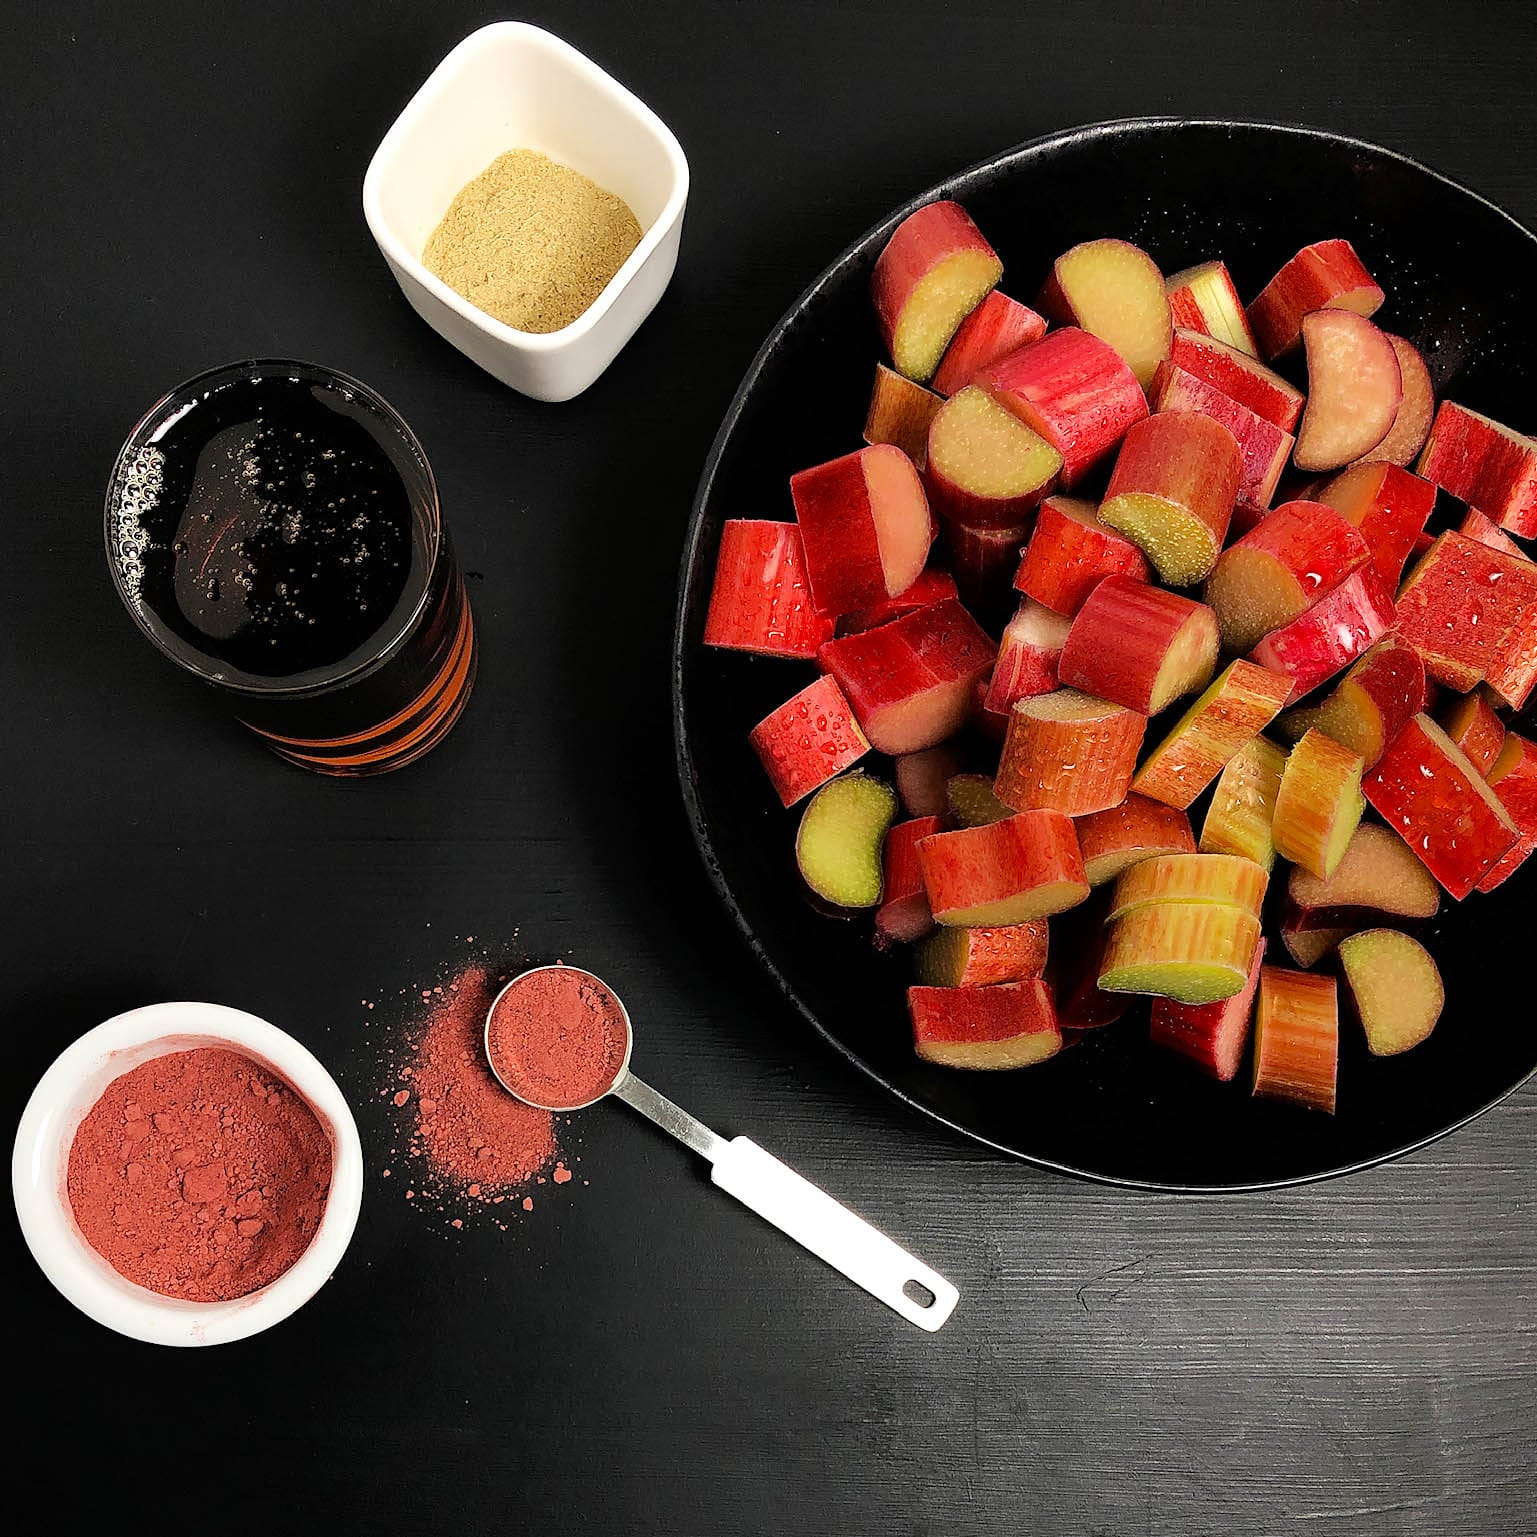 Top-down view of the ingredients for maple rhubarb compote: rhubarb, optional beet root powder, maple syrup, and cardamom